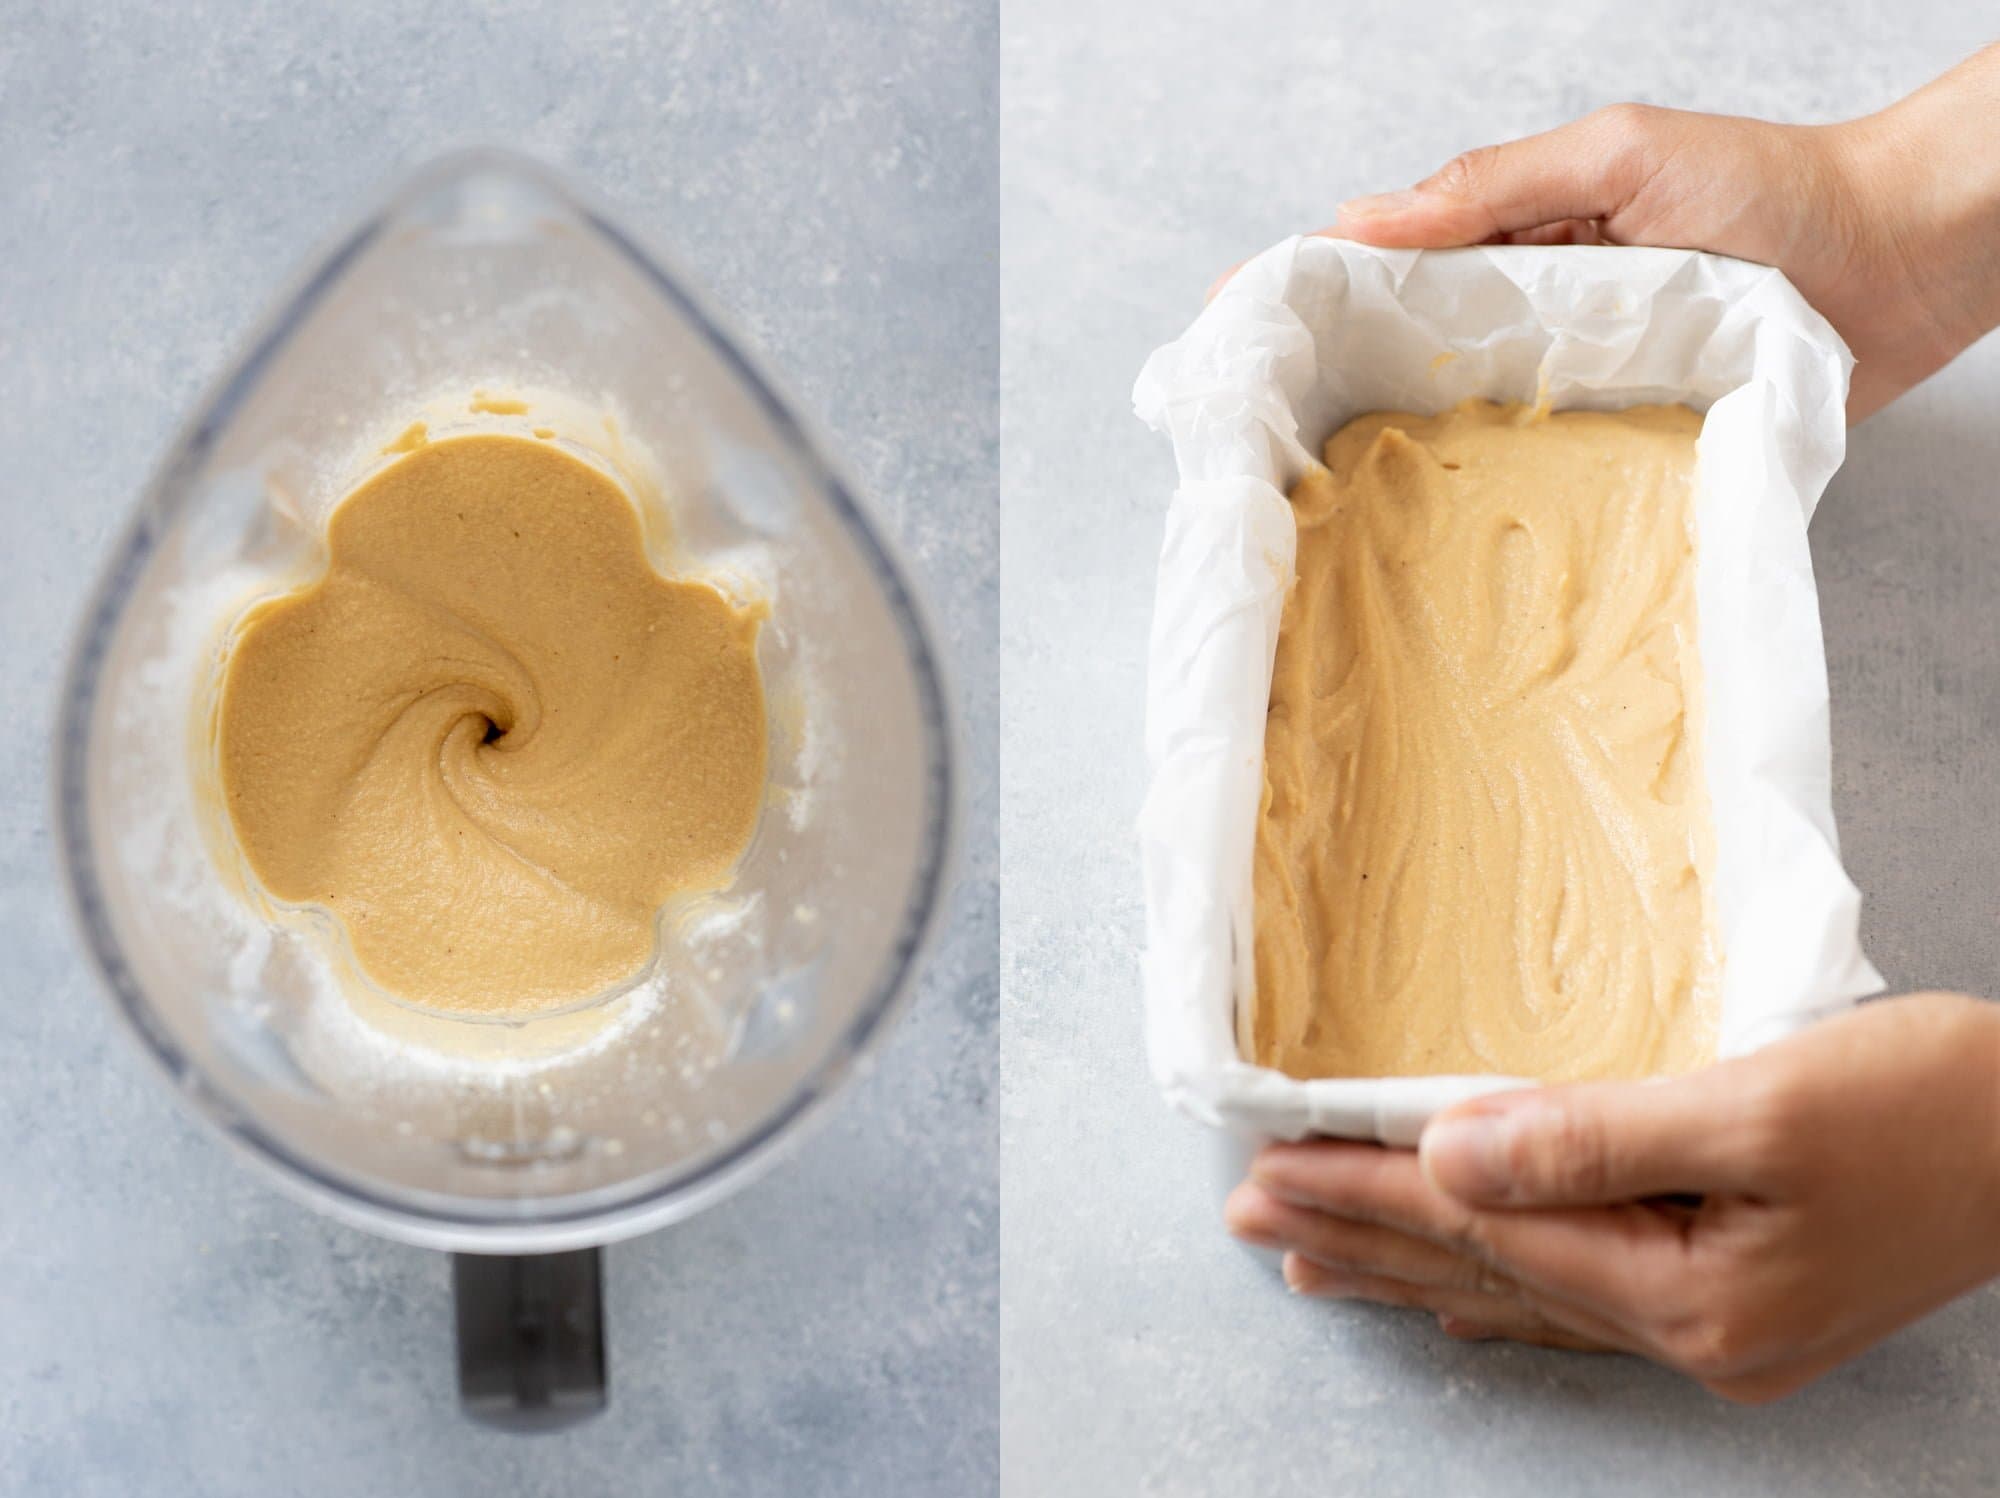 Split shot. On the left, the batter for Grain-Free Cashew Sandwich Bread is in a blender. On the right, it has been poured into a loaf pan.